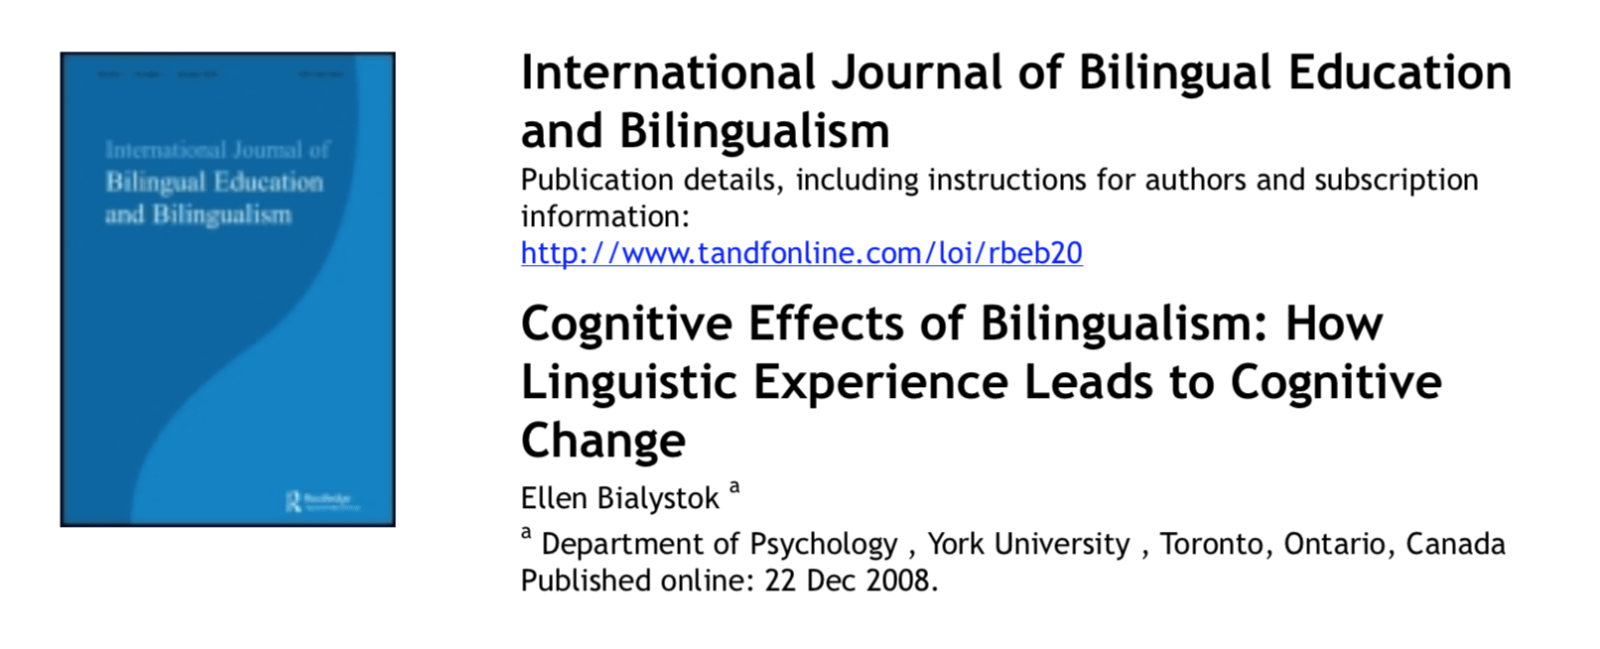 Cognitive Effects of Bilingualism